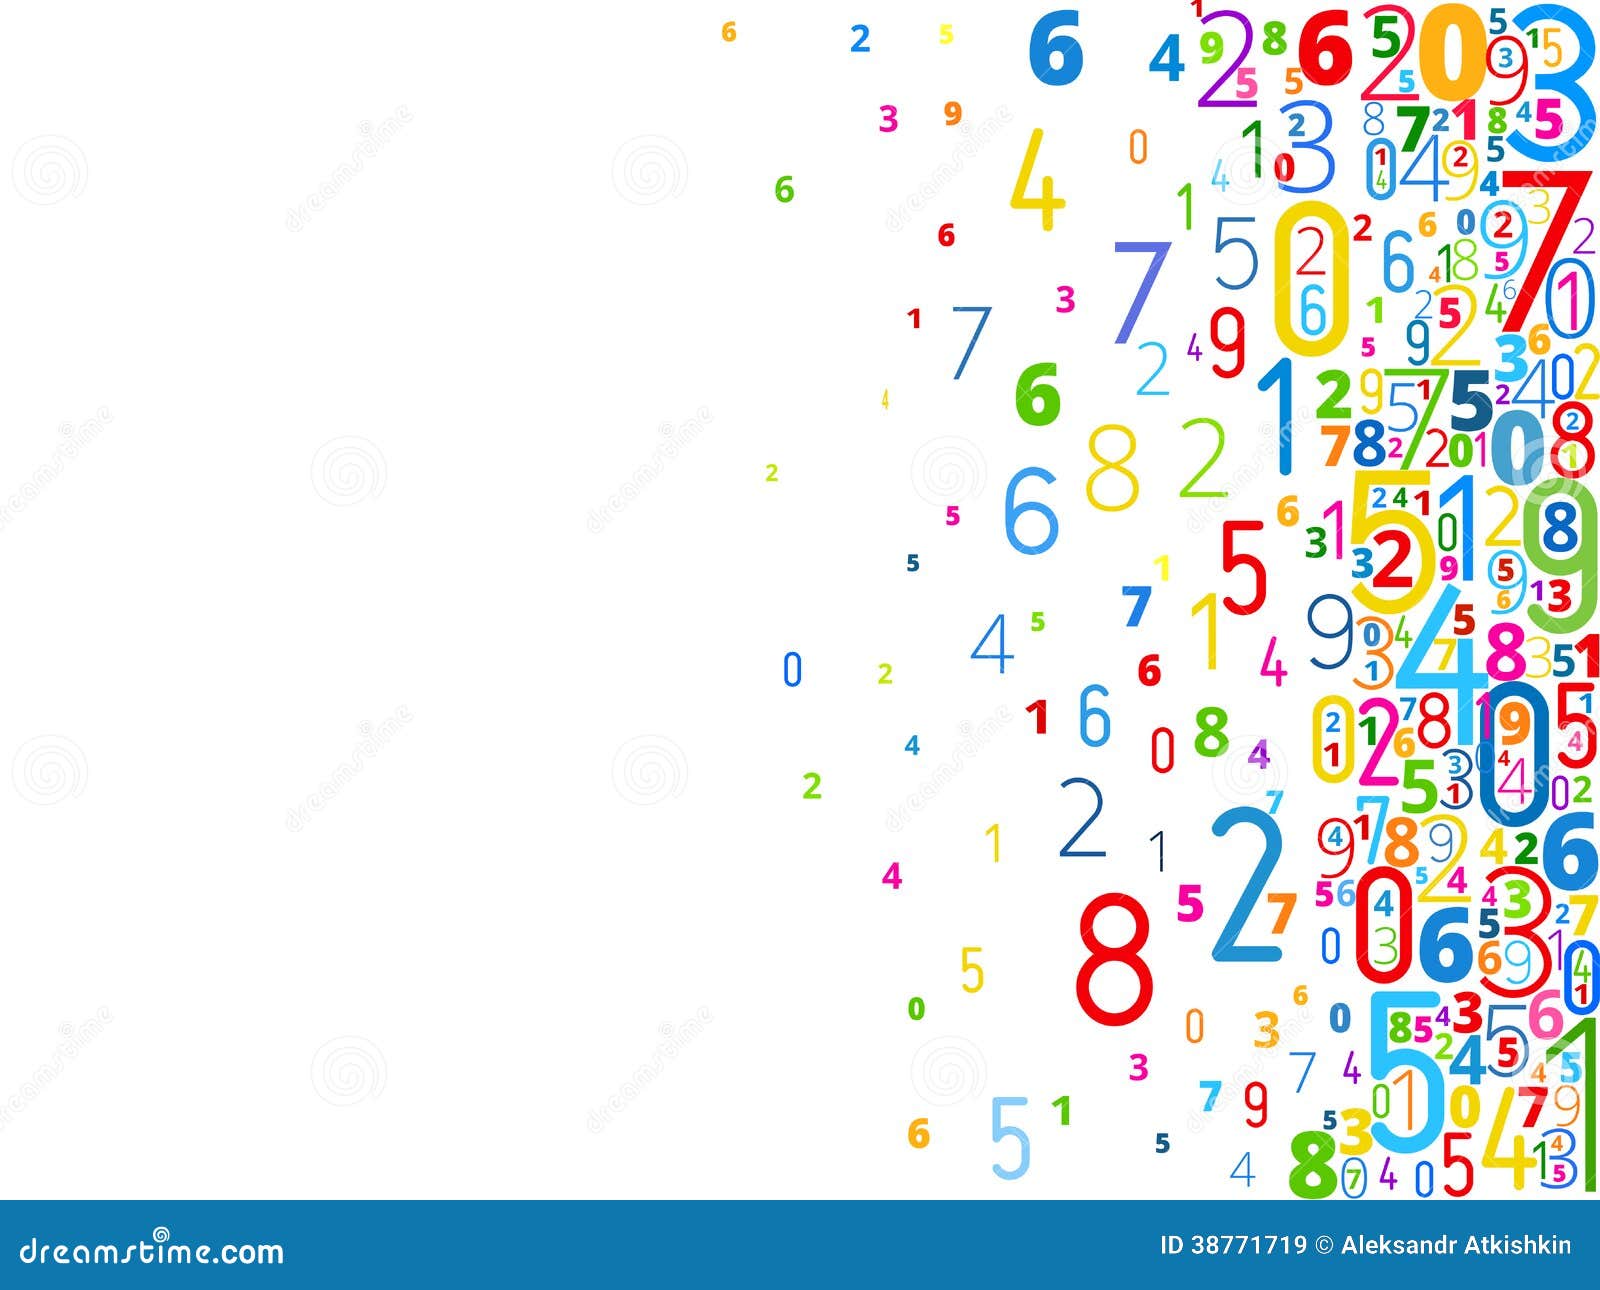 tumblr backgrounds math from background numbers Vector